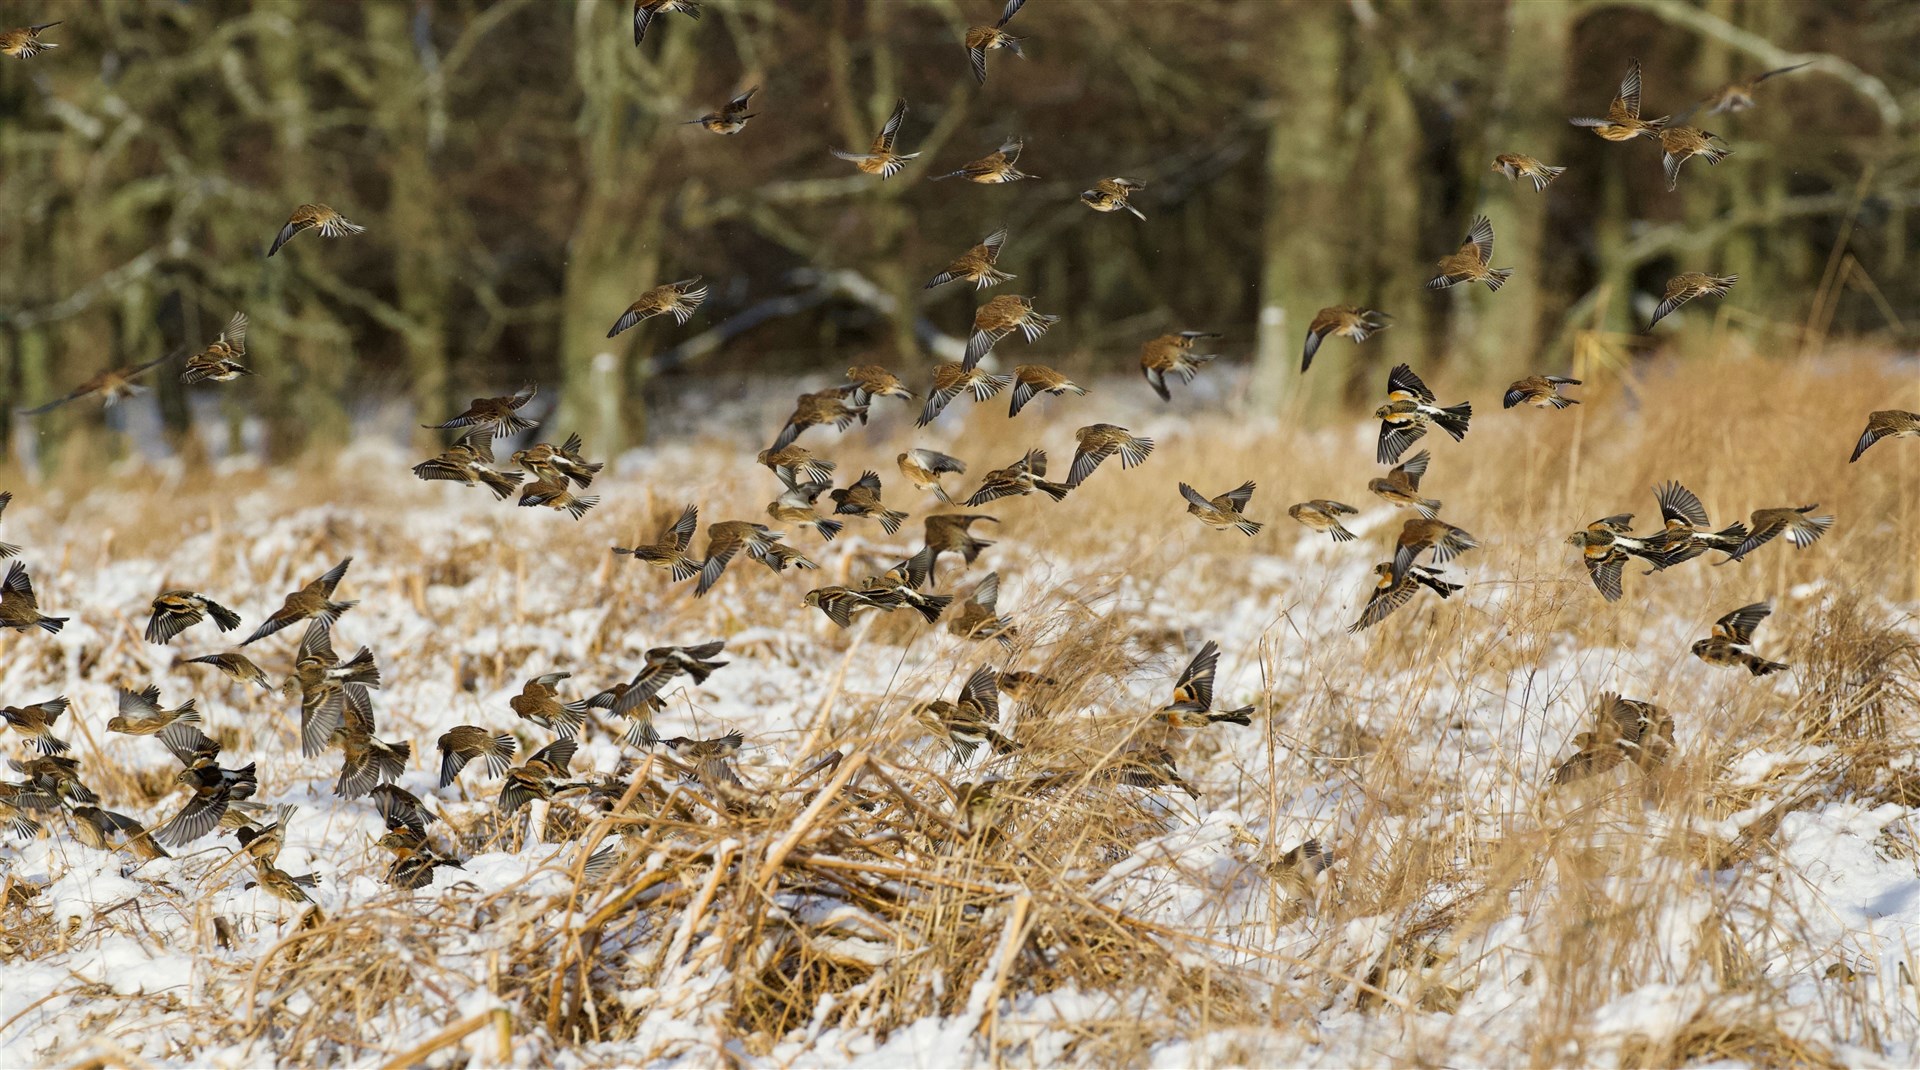 The charity has encouraged visitors to flock in over the winter to Strathspey. Photos: Speyside Fields for Wildlife